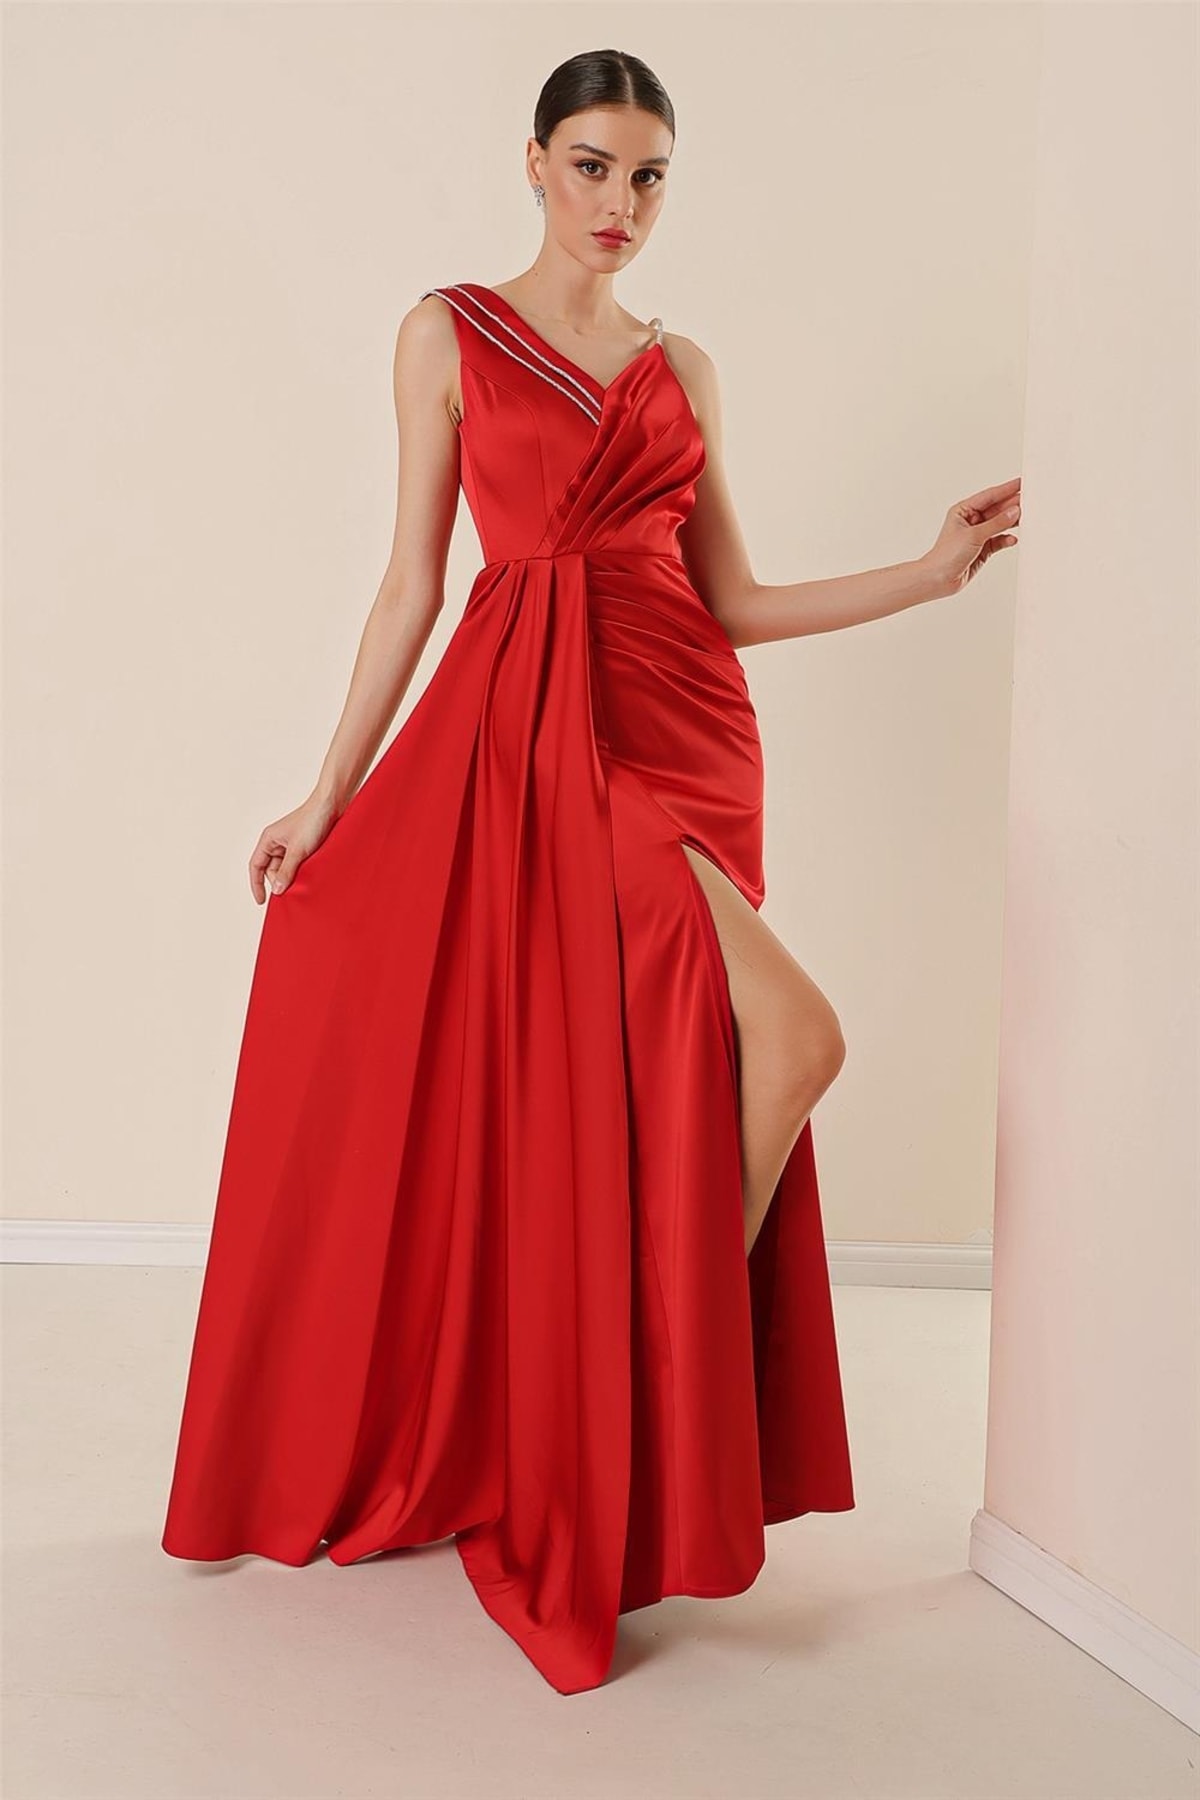 By Saygı Double-layered Collar, Lined with Stones and a slit in the Front, Handkerchief Long Satin Dress Red